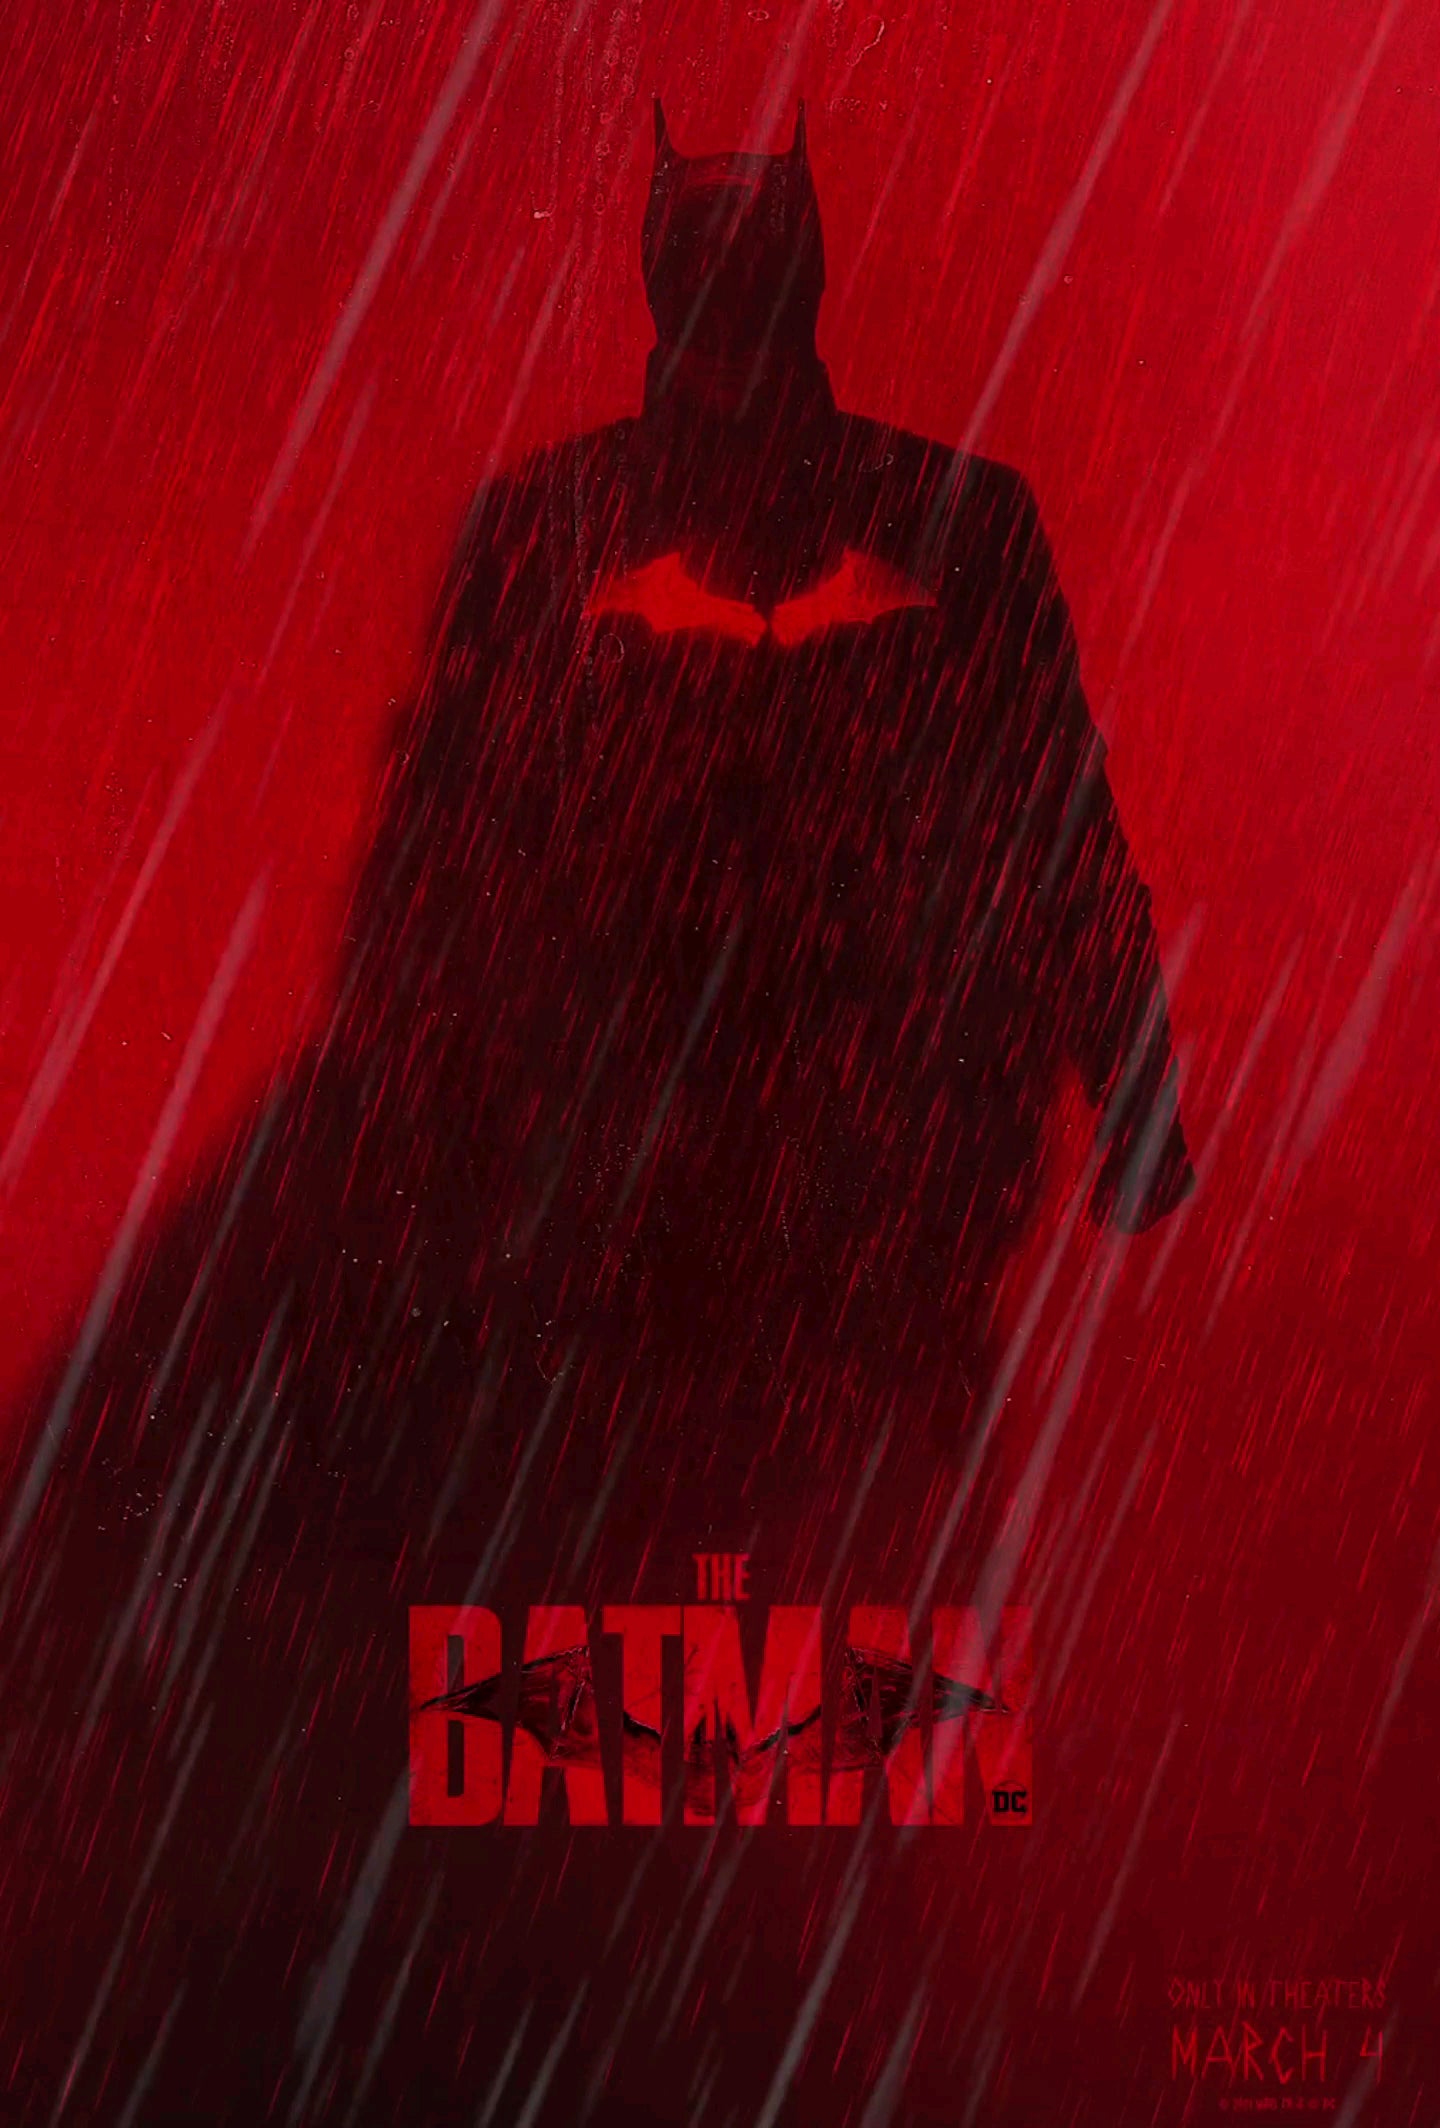 Live animated wallpaper made by me of The Batman movie